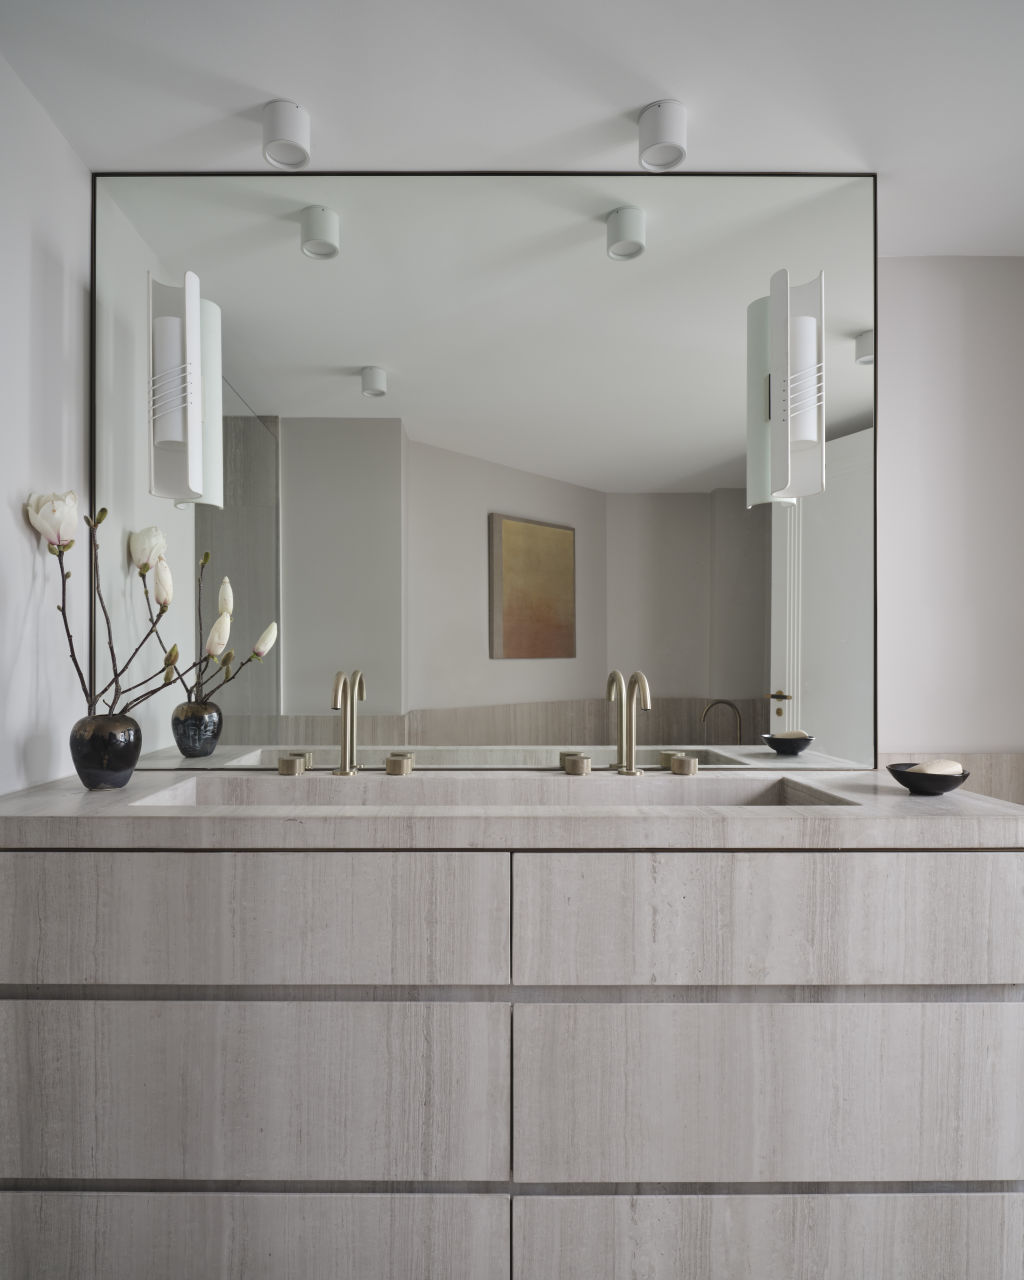 Sleek cabinetry is a property design detail. Photo: Supplied